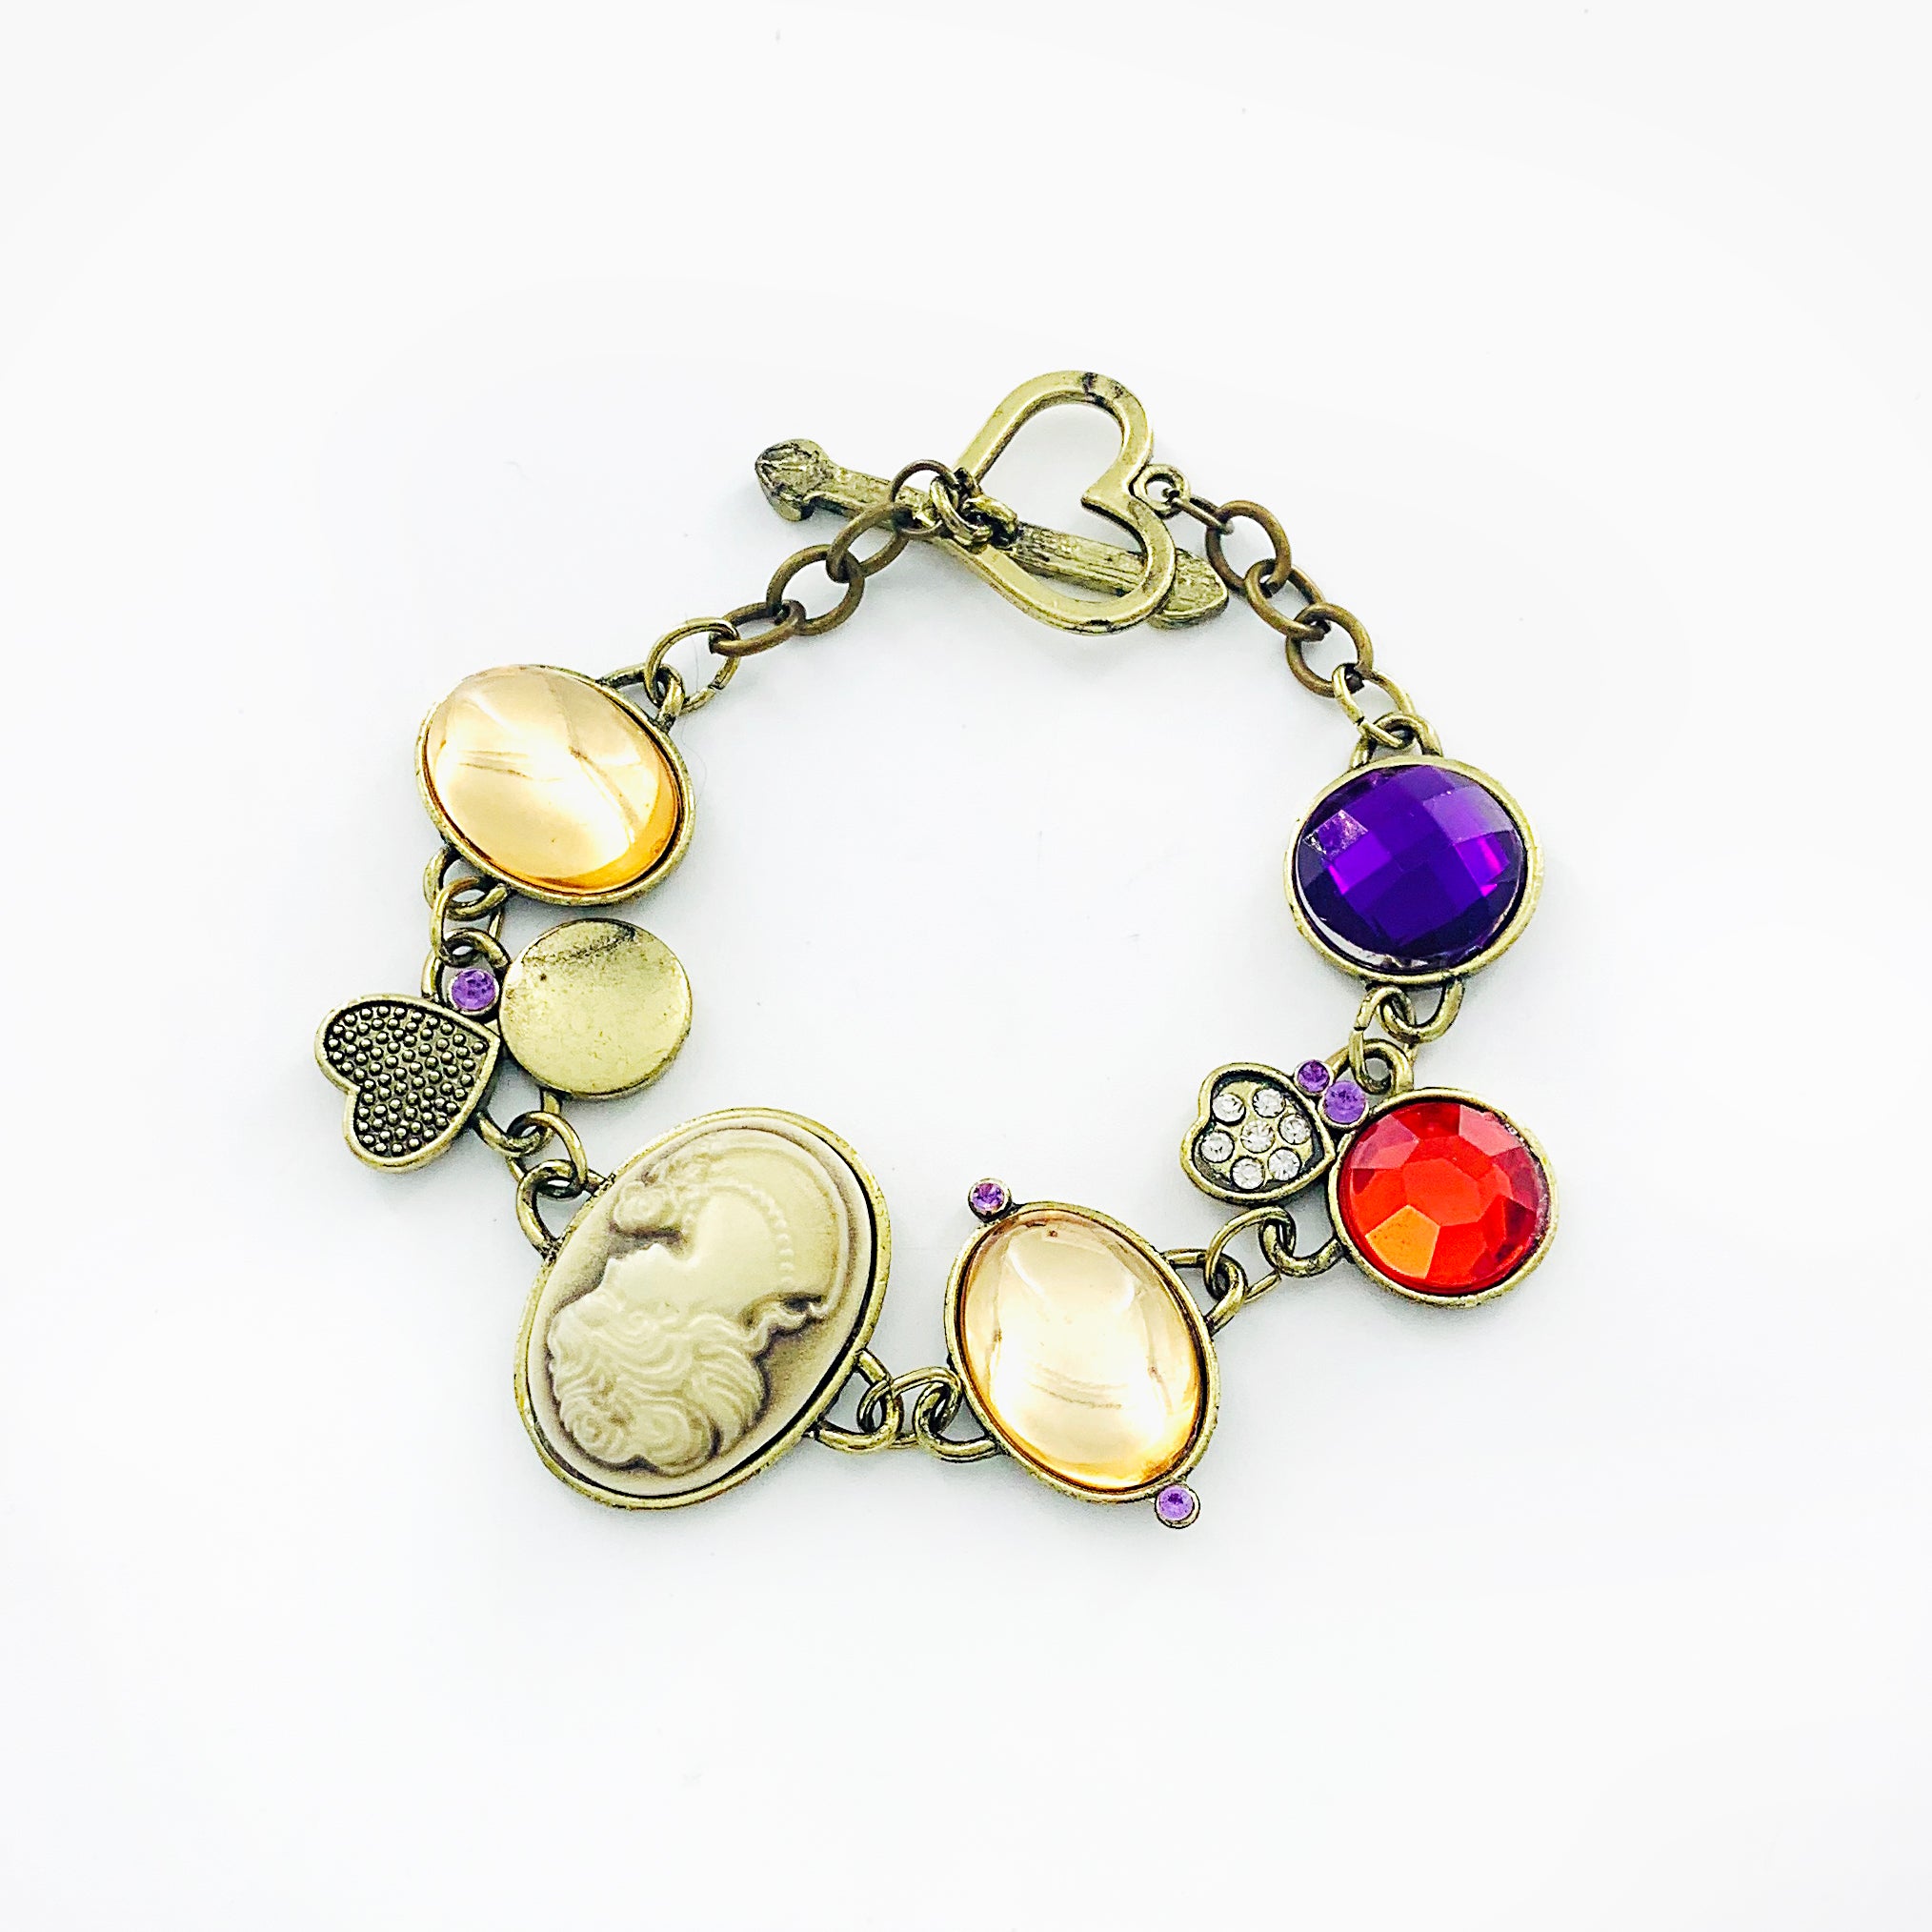 Vintage-styled bracelet with colourful stones